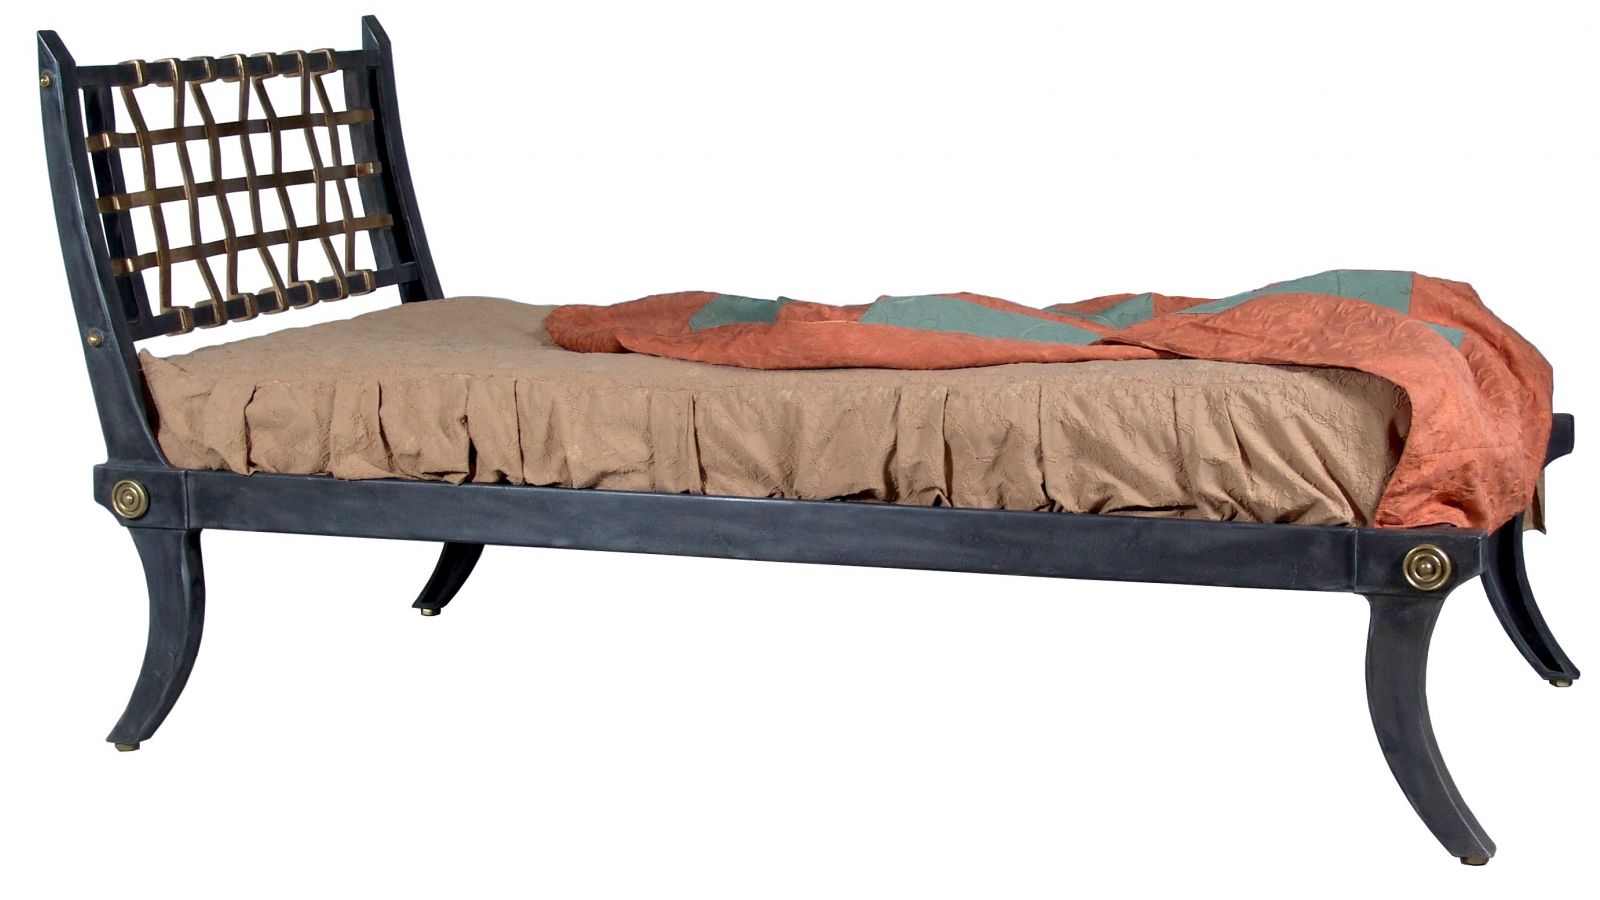 BE7815 Klismos Bed (Twin Size)